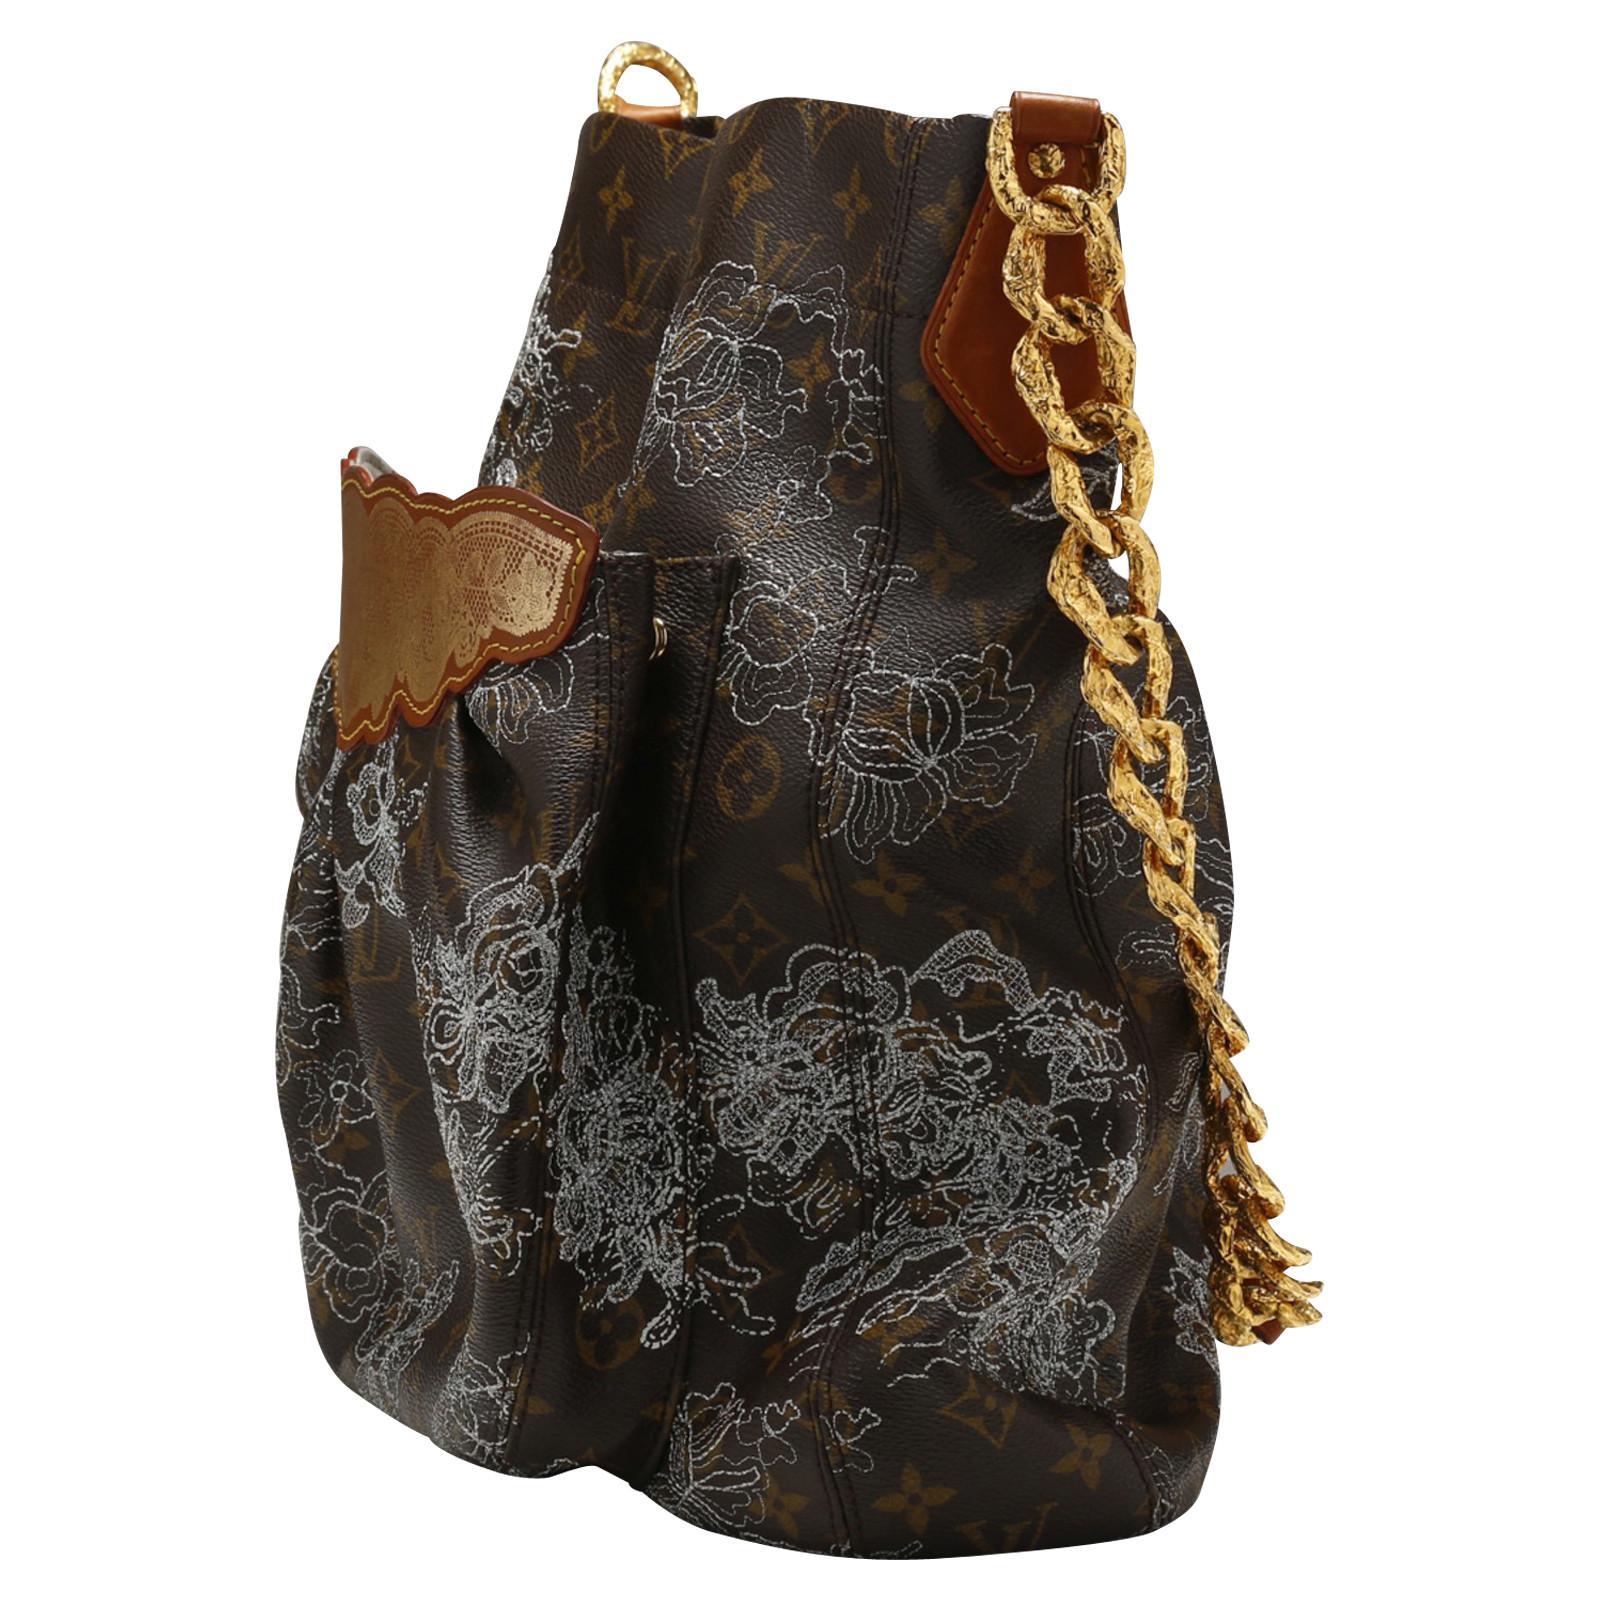 Louis Vuitton bag, Fersen Dentelle model (spring-summer 2007), super limited edition, in printed Monogram canvas embroidered with lace of silver metallic threads depicting a flower decoration, alcantara lining, chain shoulder strap in gilt metal.